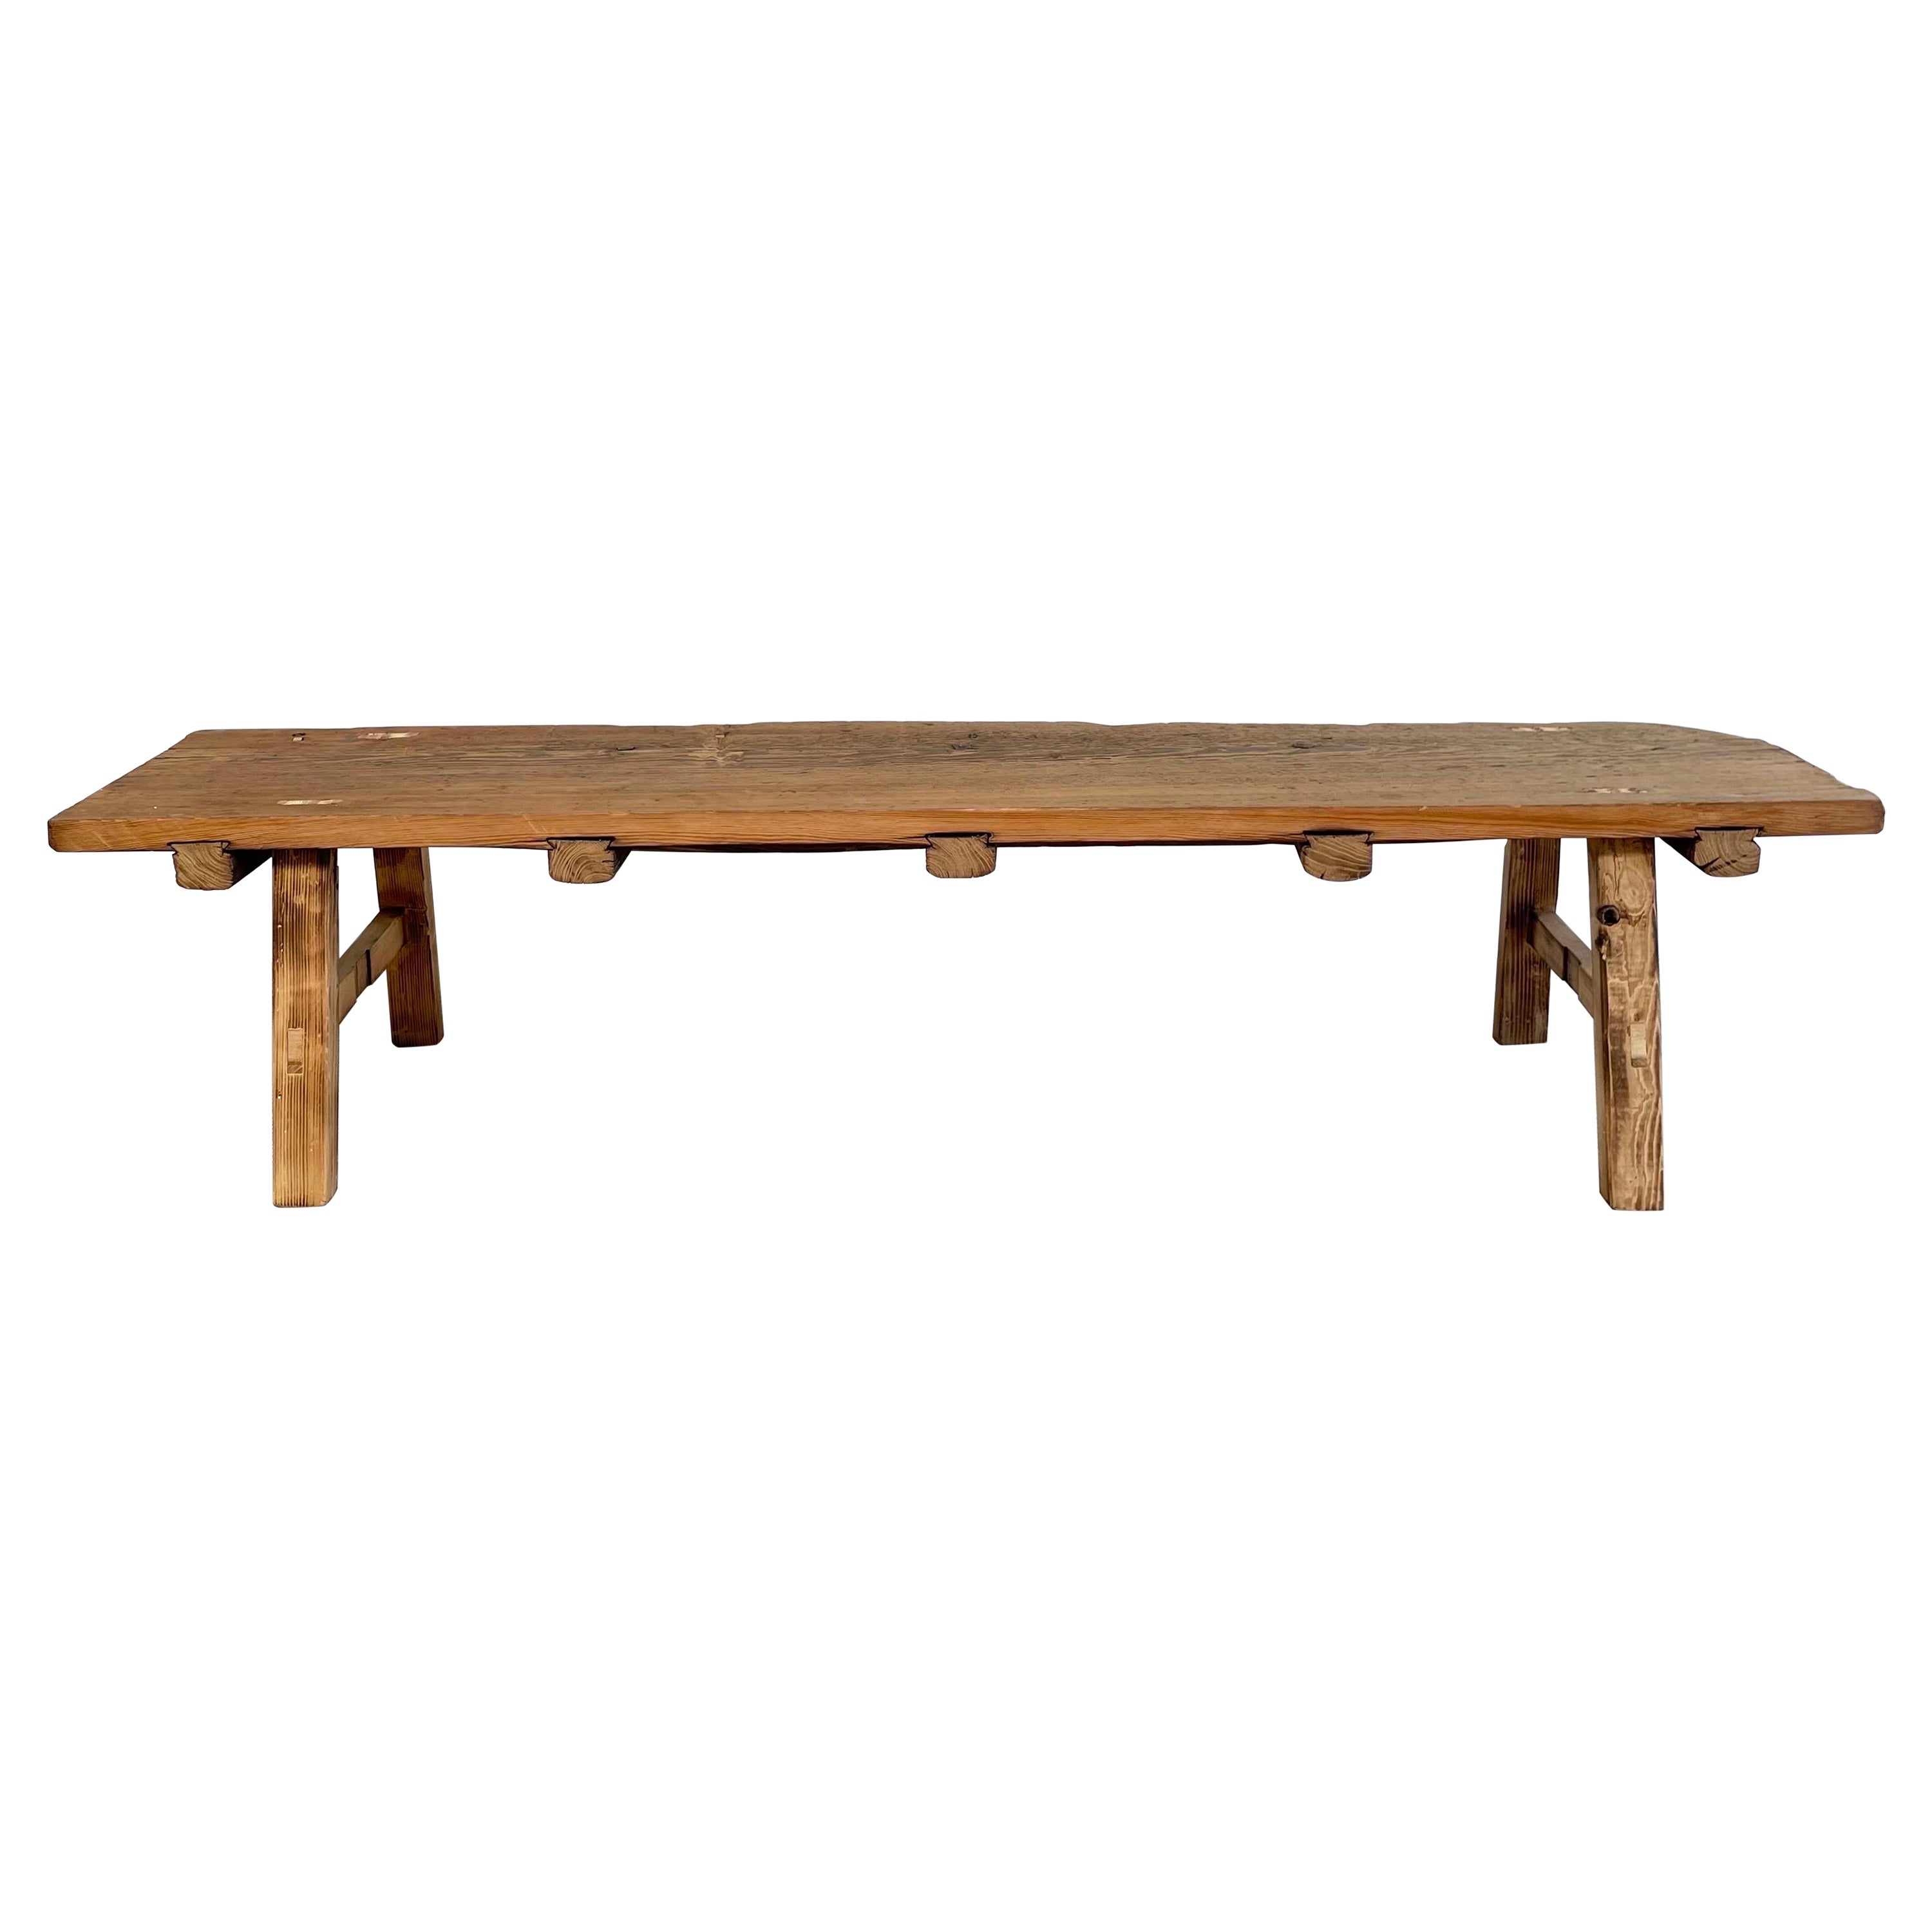 Vintage Elm Wood Coffee Table or Wide Seat Bench